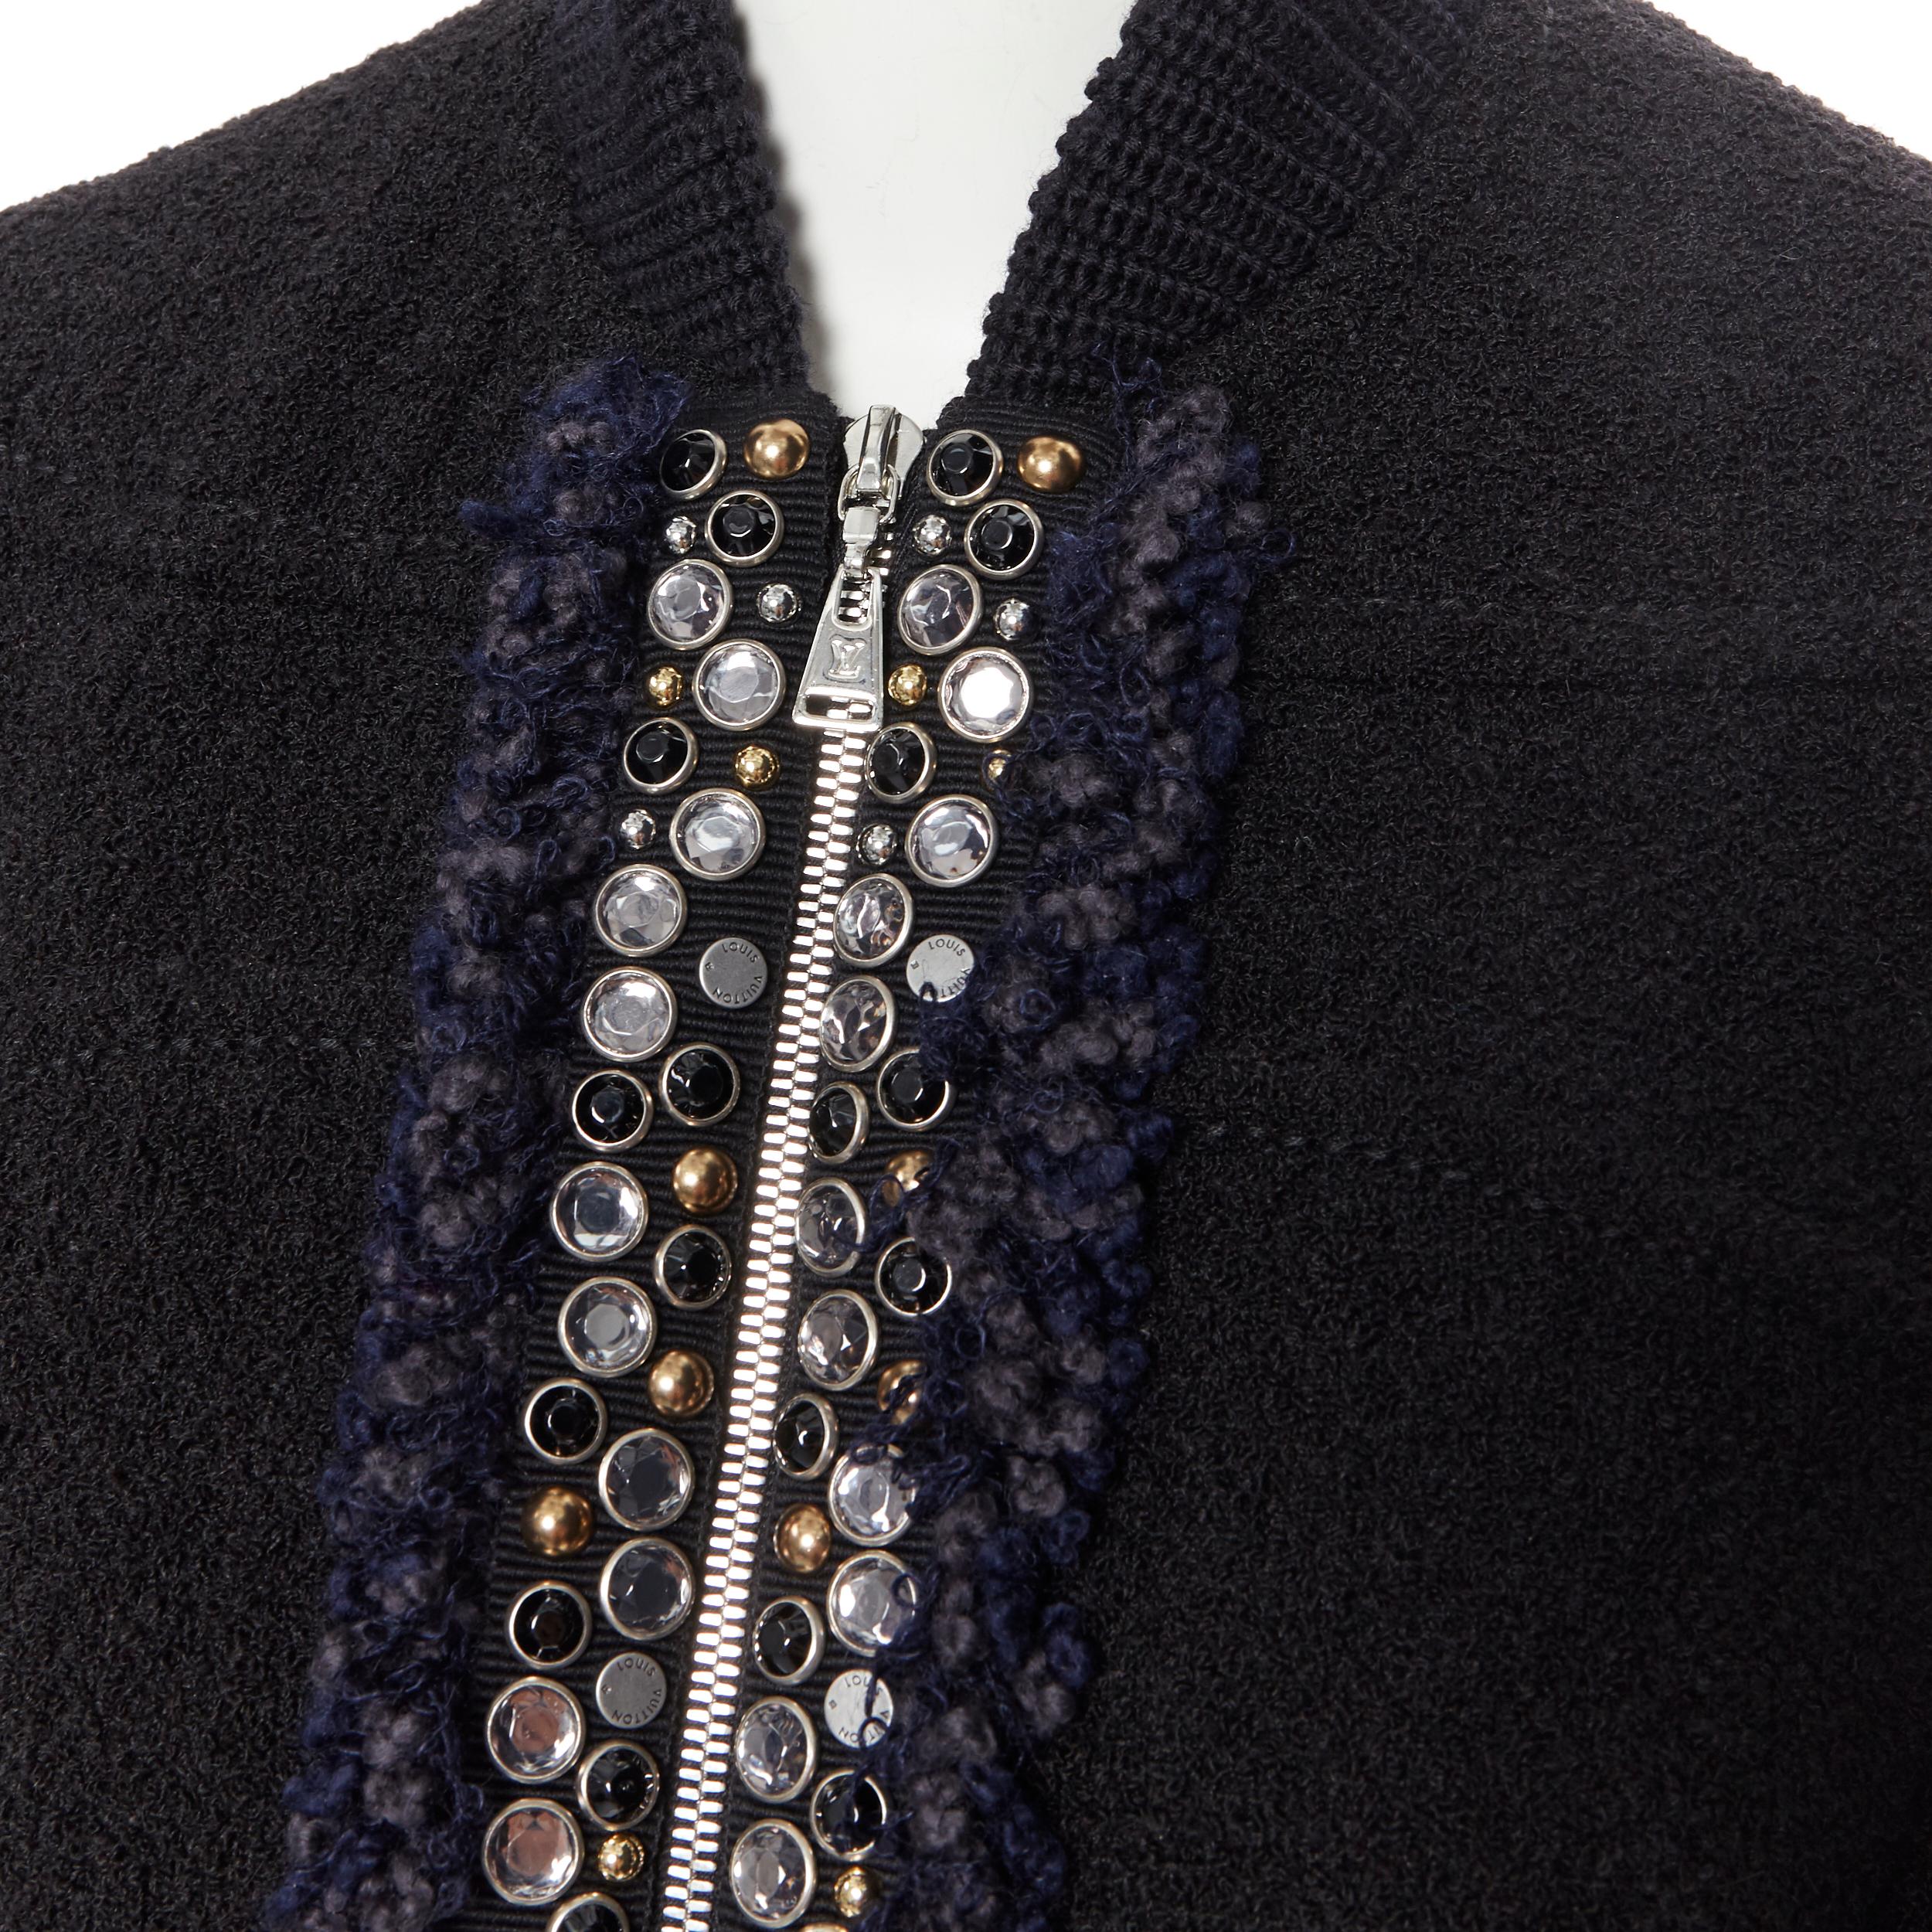 runway LOUIS VUITTON black boucle jewel stud embellished cocoon cape coat FR36 S 
Reference: CC/ATHH0305 
Brand: Louis Vuitton 
Designer: Nicolas Ghesquiere 
Material: Wool 
Color: Black 
Pattern: Solid 
Closure: Zip 
Extra Detail: Printed lining.